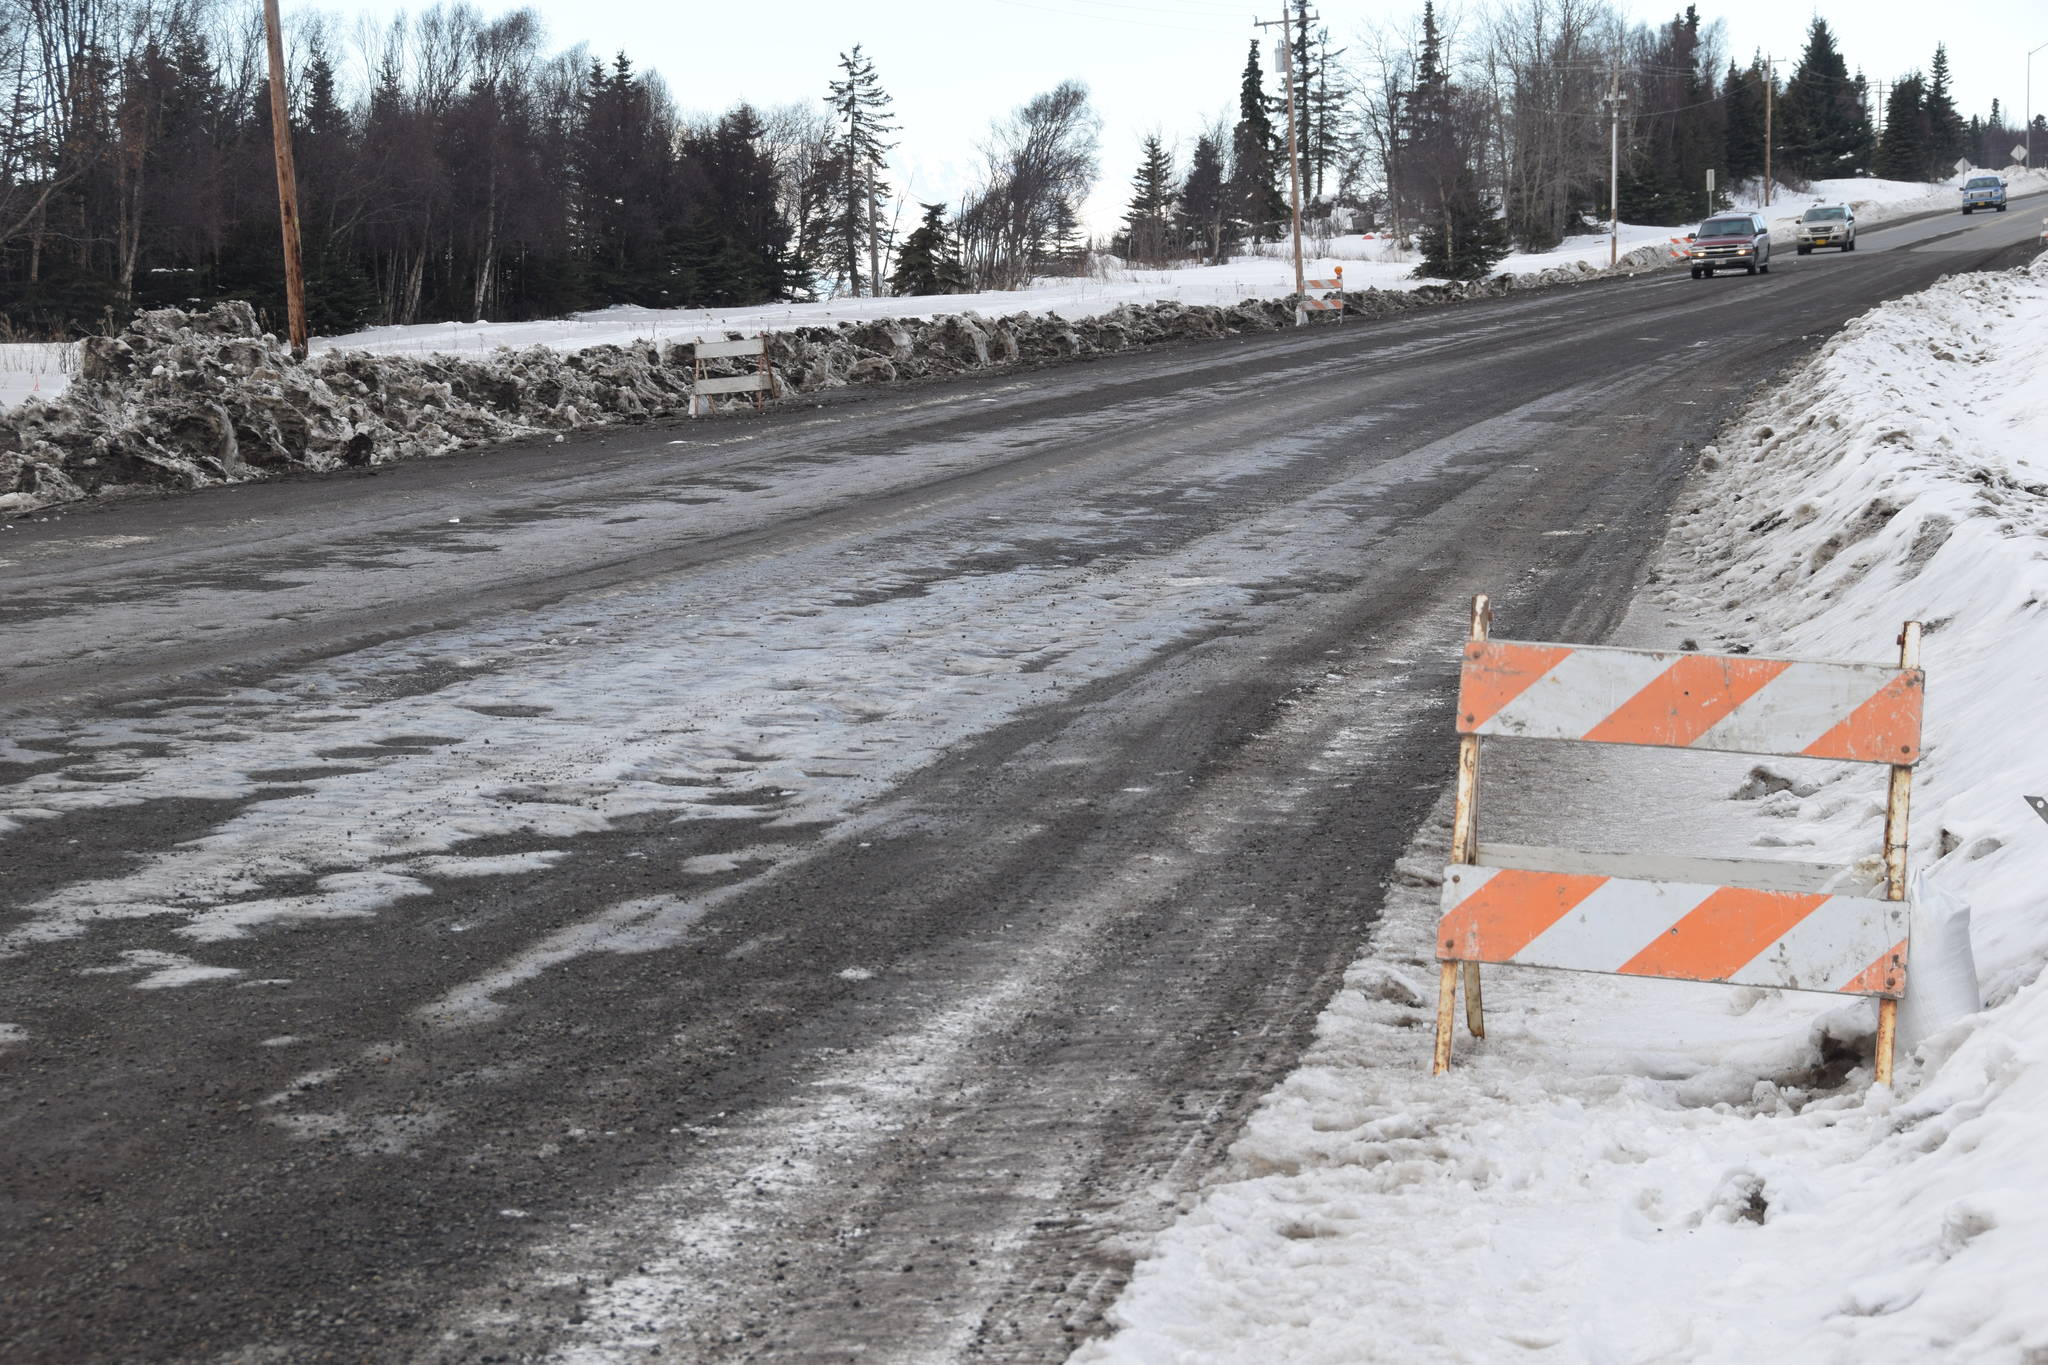 The section of unpaved road on the Kenai Spur Highway heading into Nikiski, as seen on Feb. 26, 2019. (Photo by Brian Mazurek/Peninsula Clarion)